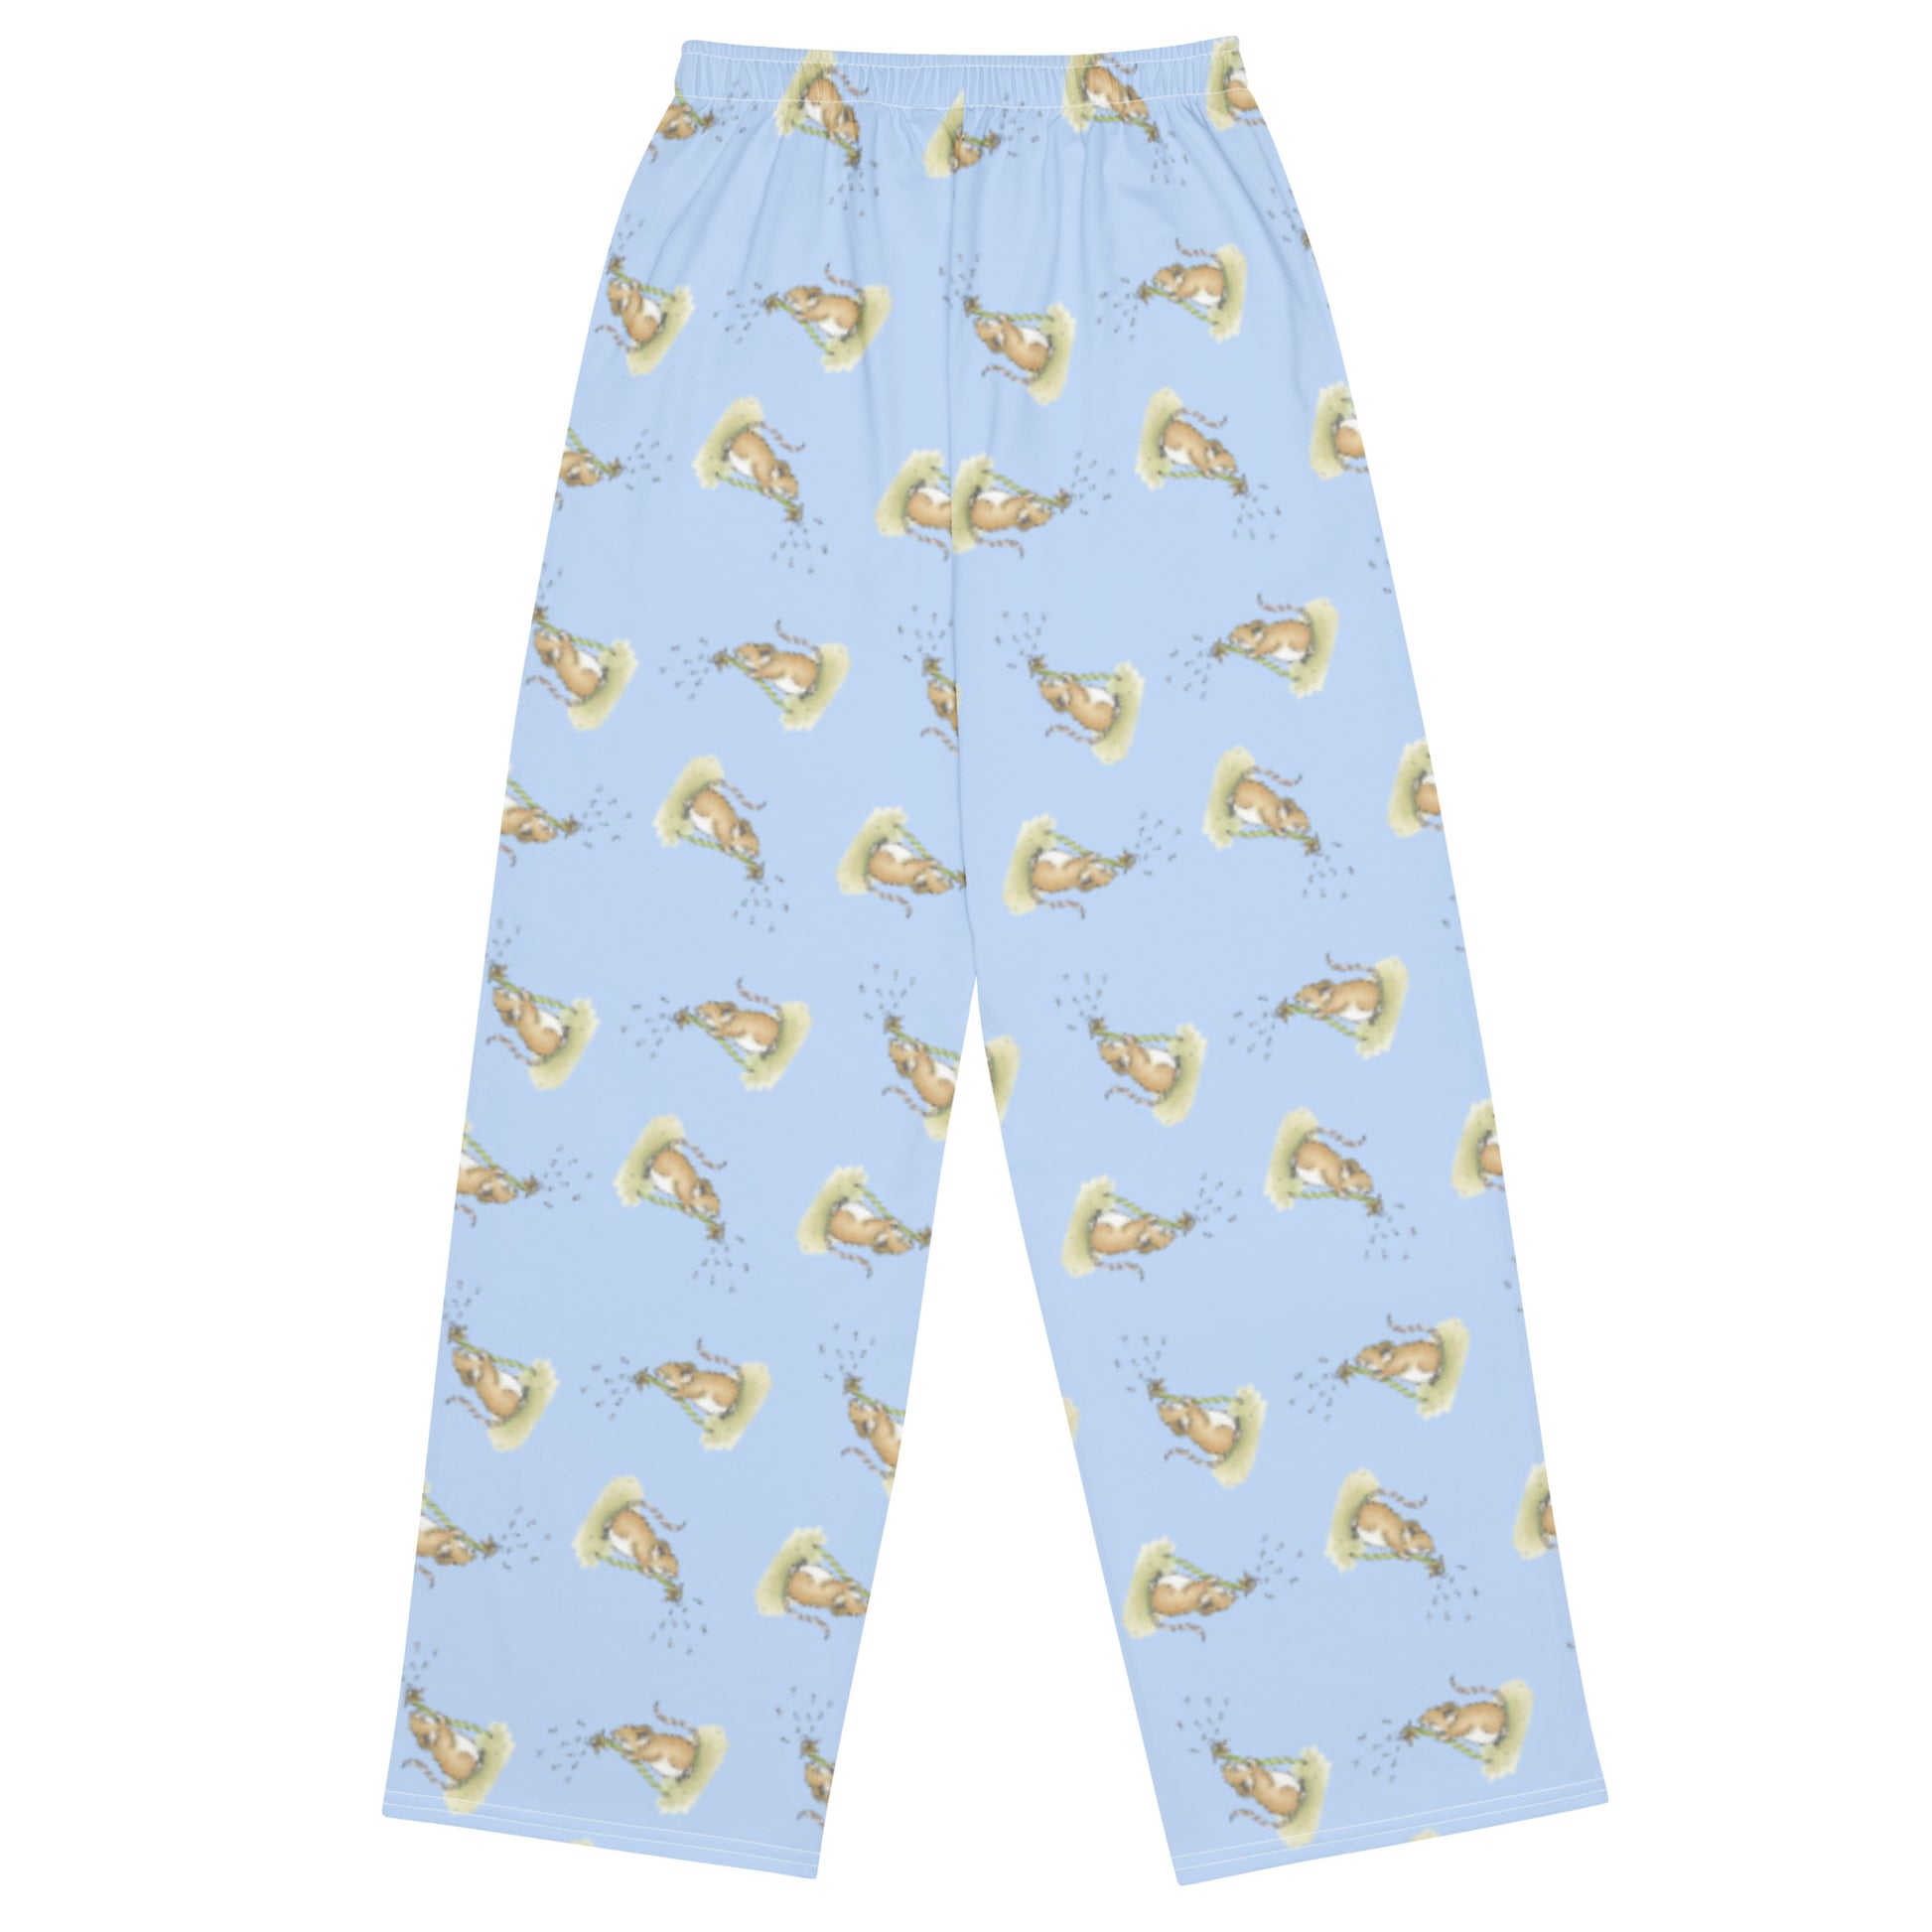 Unisex wide leg polyester pajama pants. Features dandelion wish patterned design on a light blue fabric. Has elastic waistband and white drawstring. Side pockets.